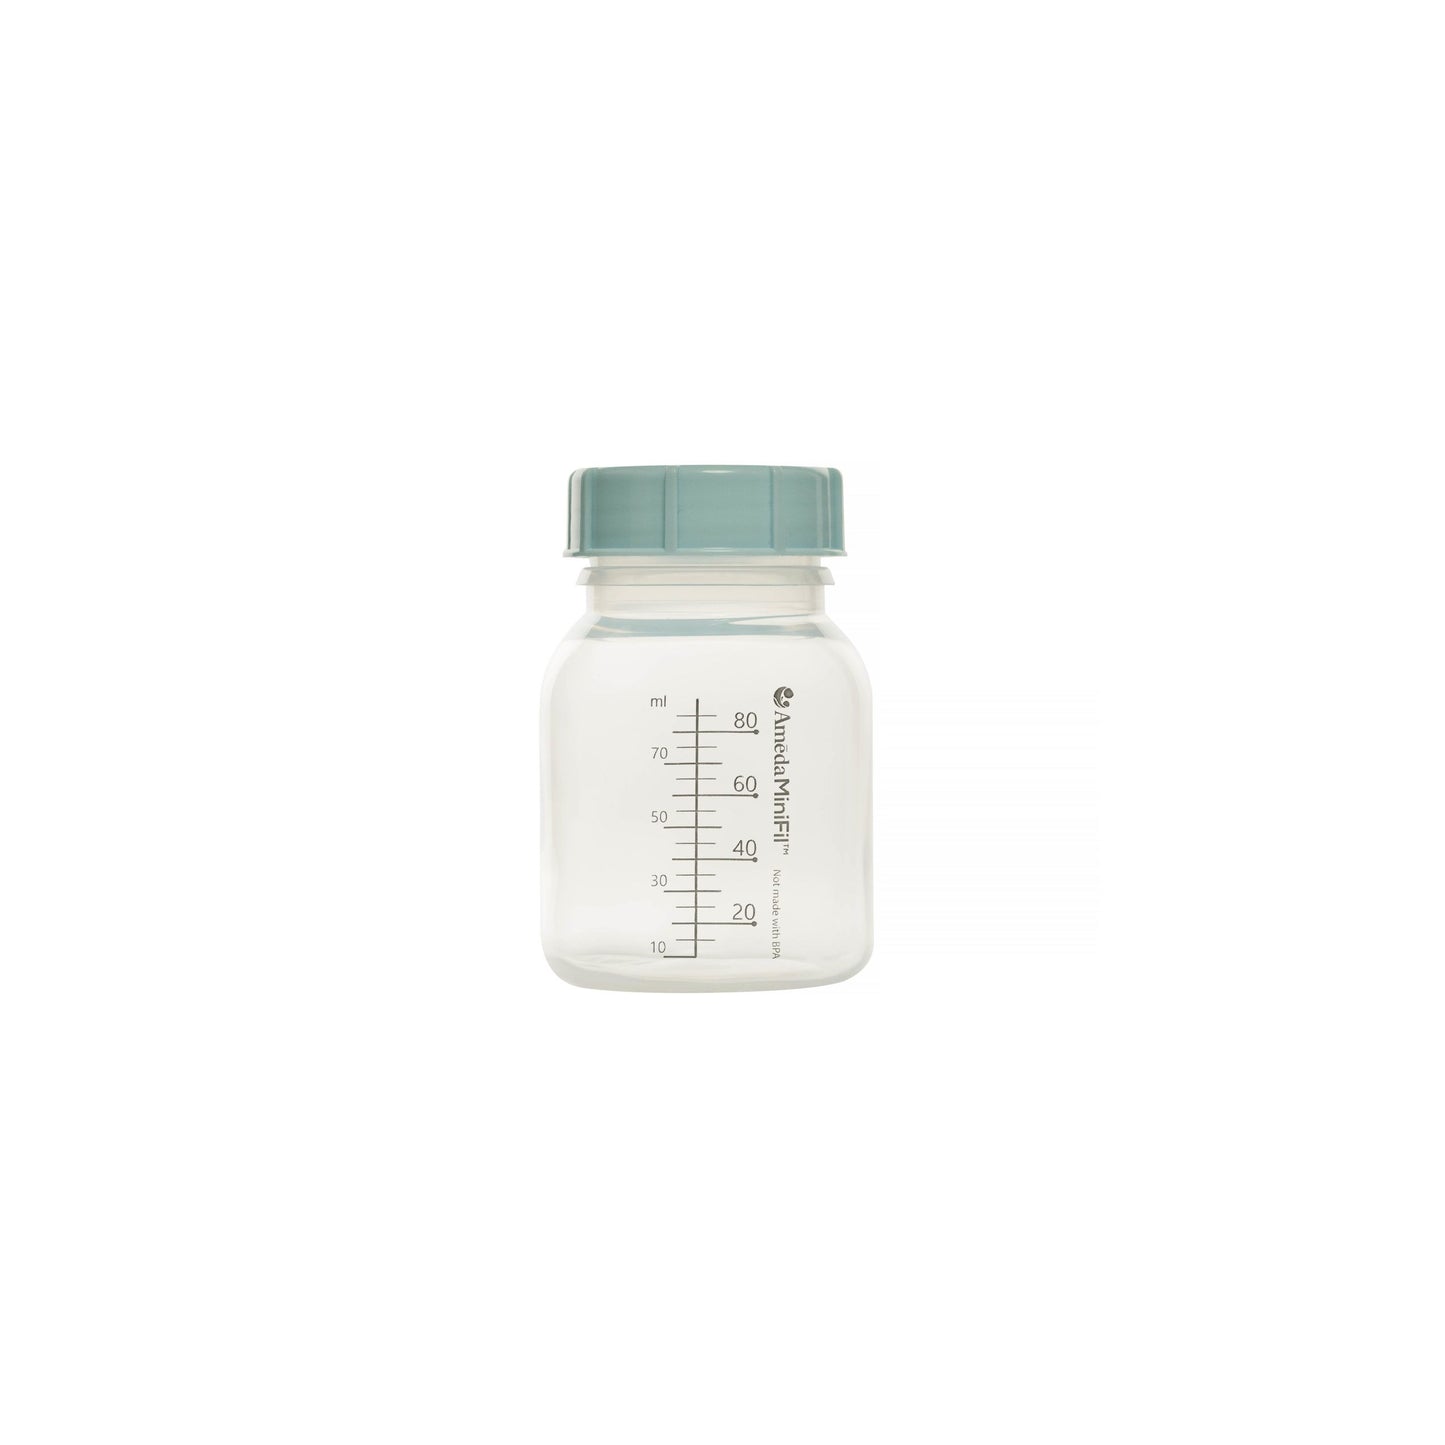 Ameda MiniFil Colostrum & Breastmilk Collection Bottles